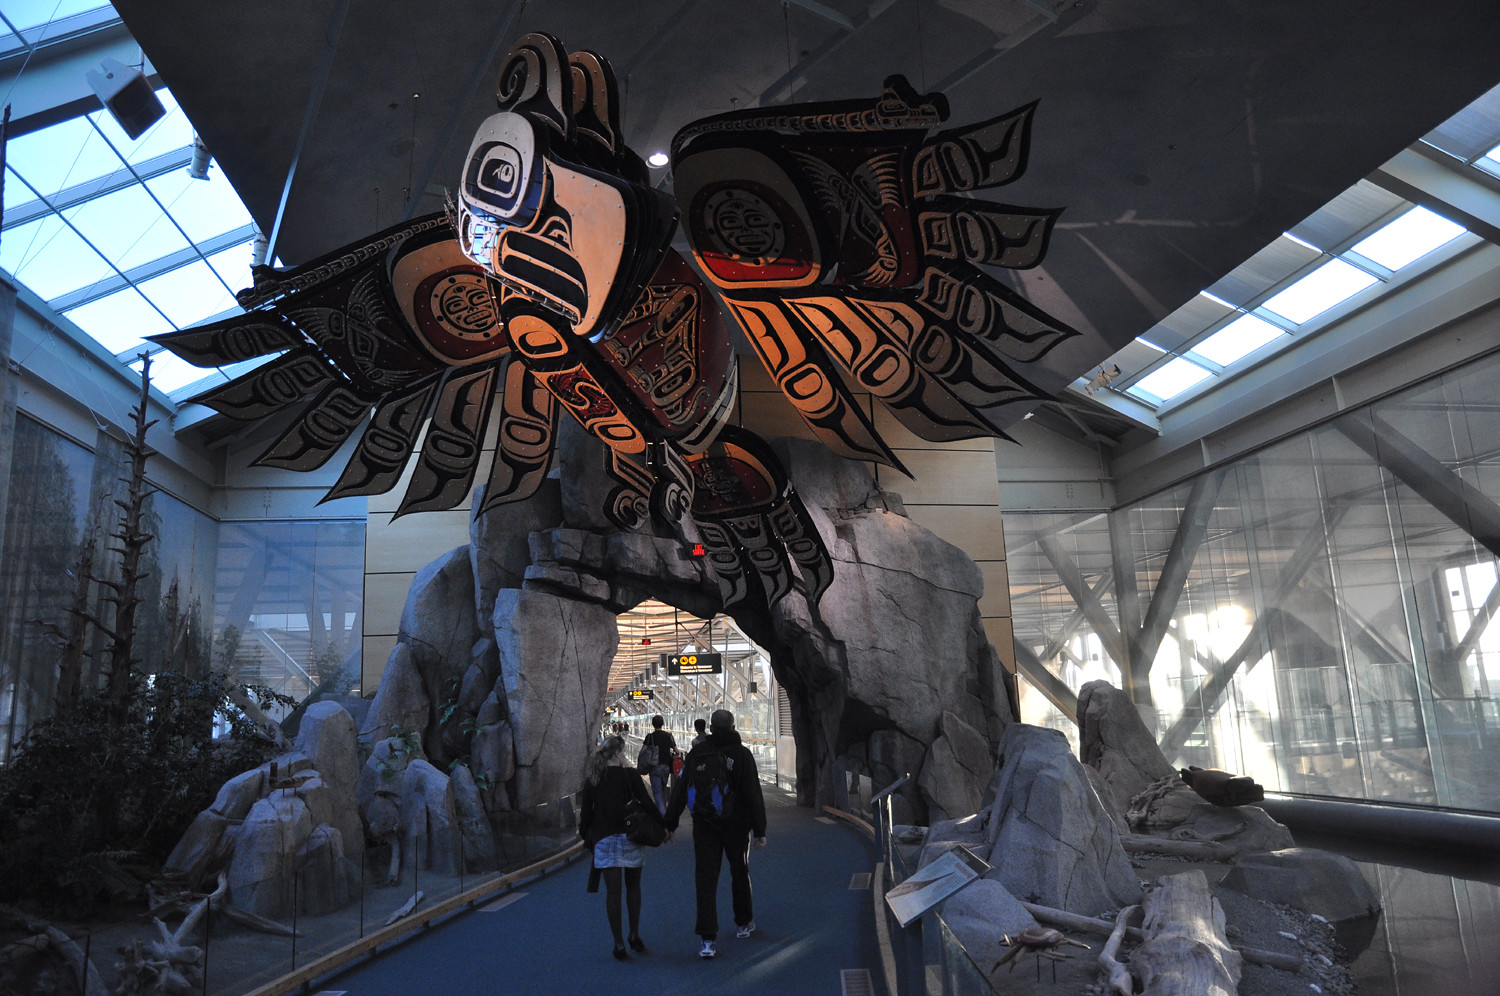 A huge carved bird painted in black and red hangs over an entryway in an airport.